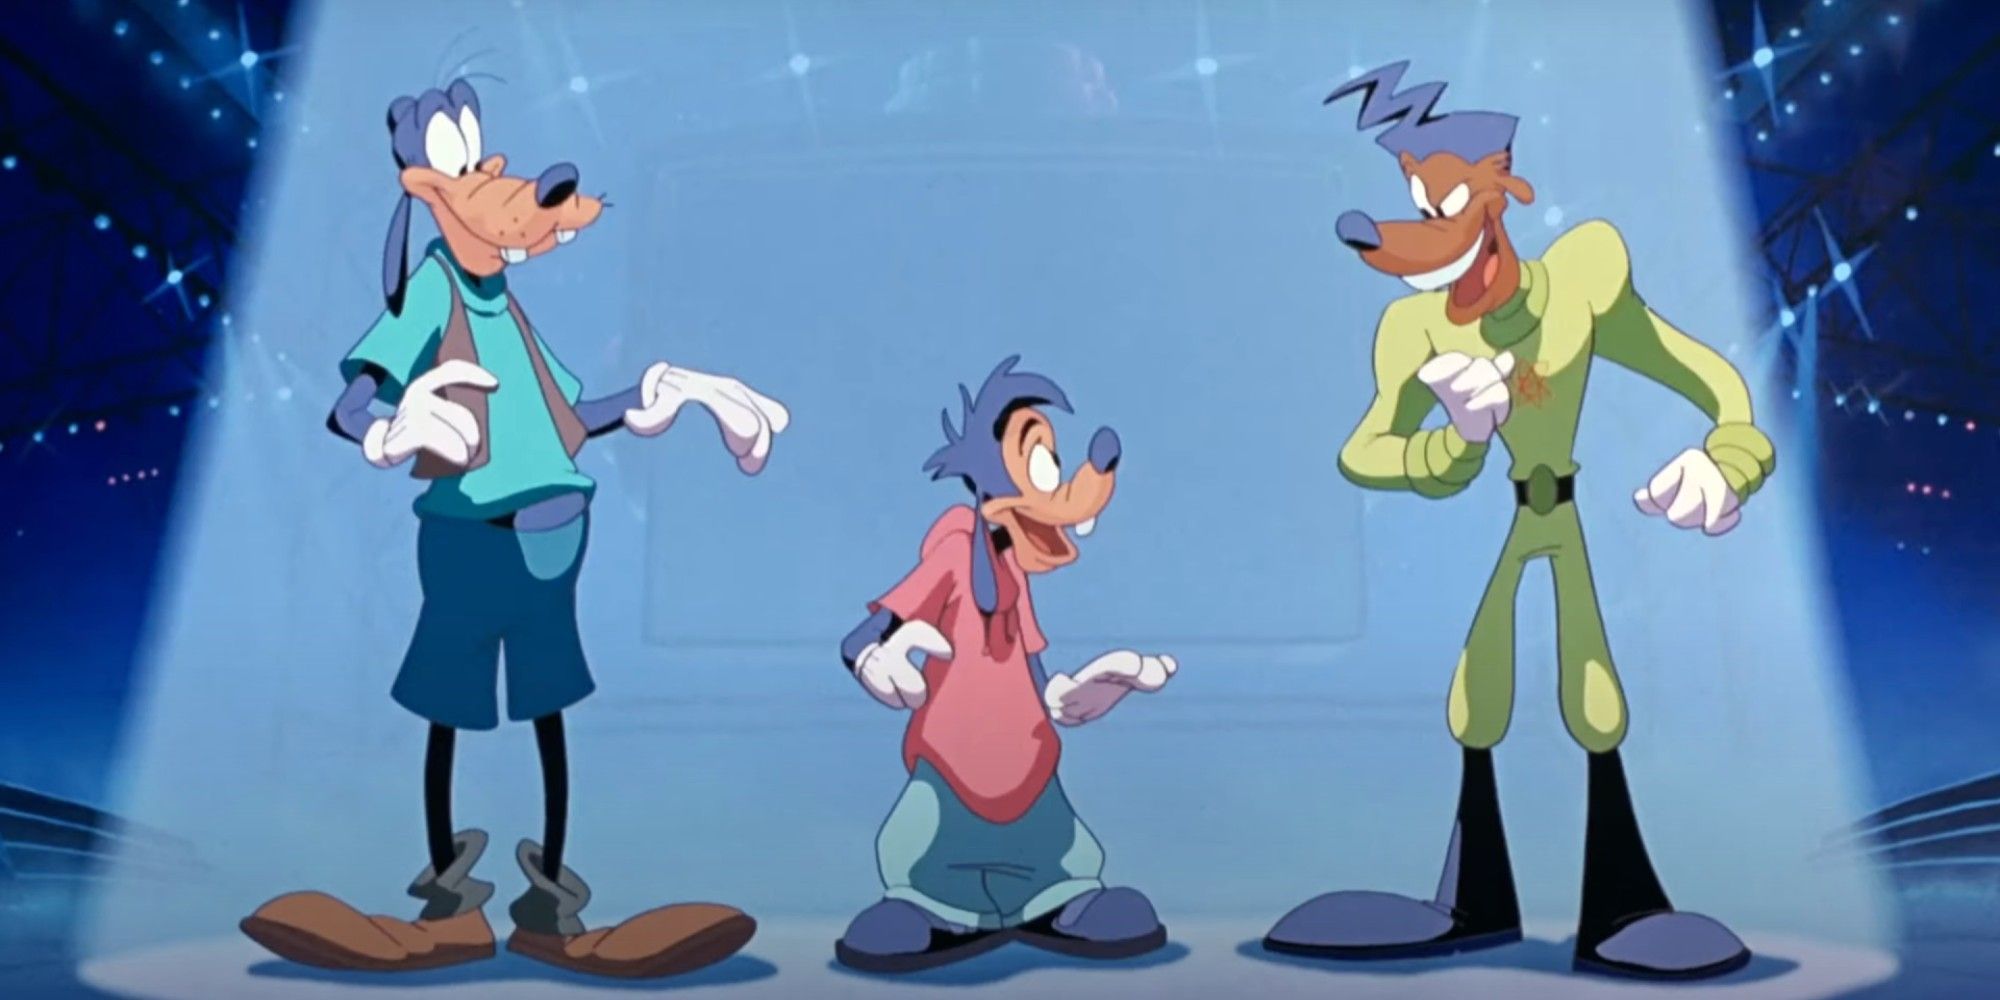 Goofy and Max on stage at the Powerline concert in A Goofy Movie